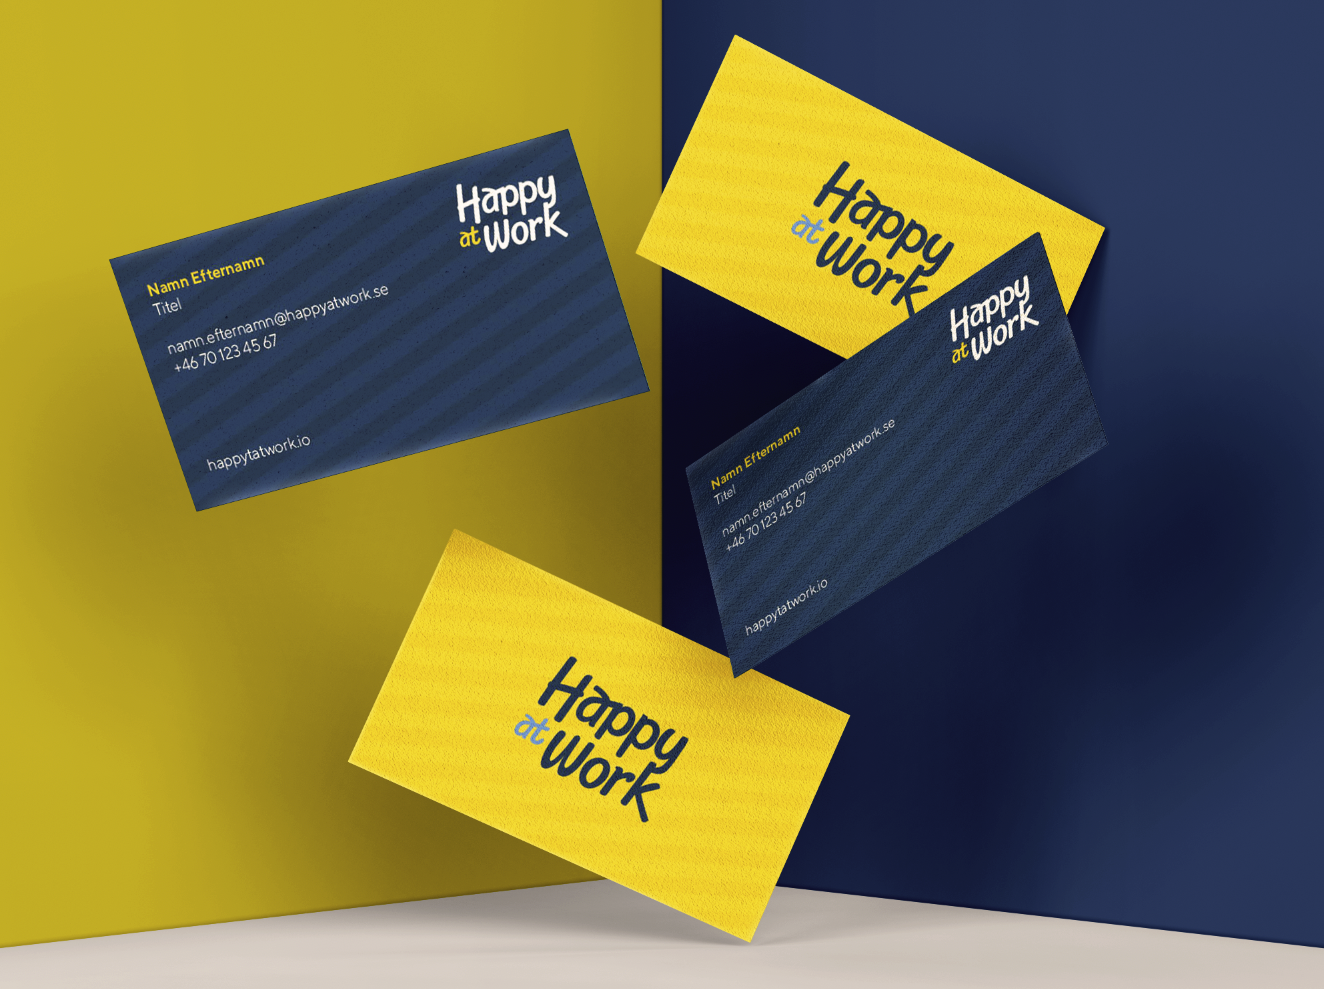 Happy at Work - cards